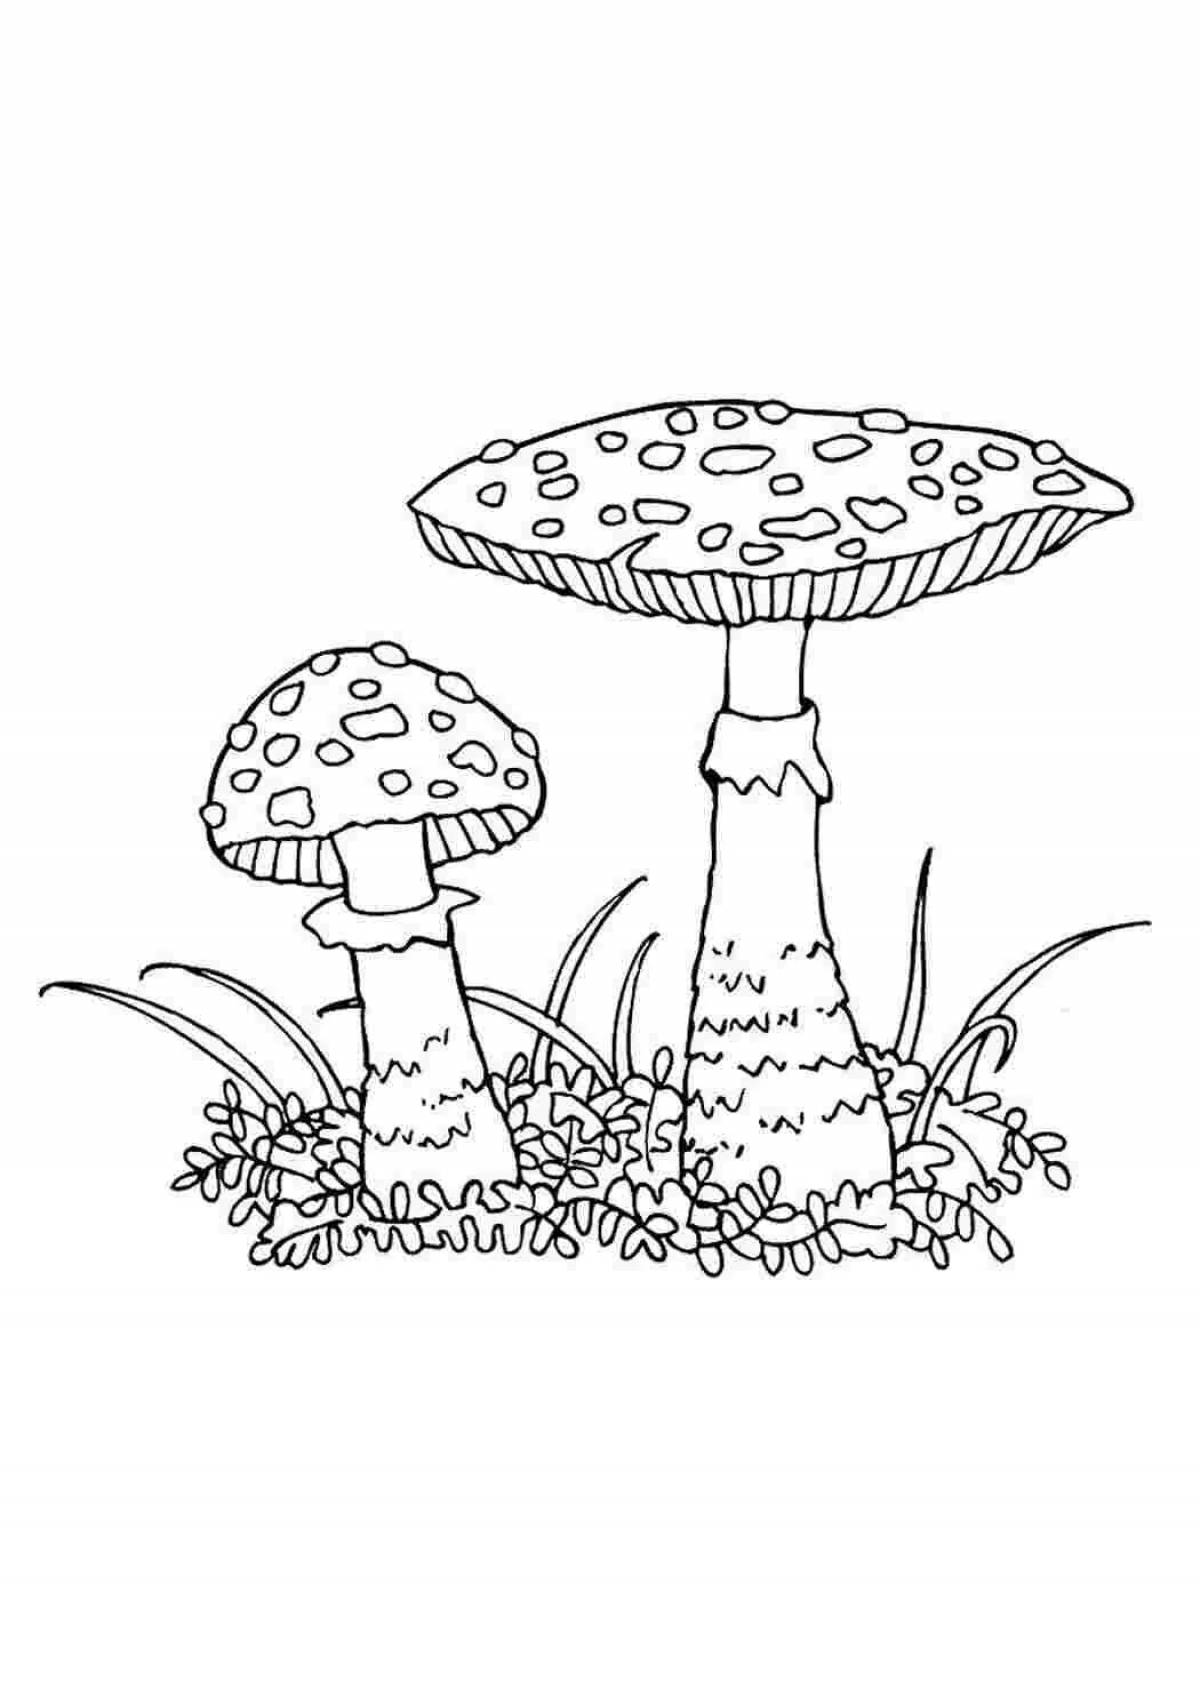 Outstanding fly agaric coloring page for kids